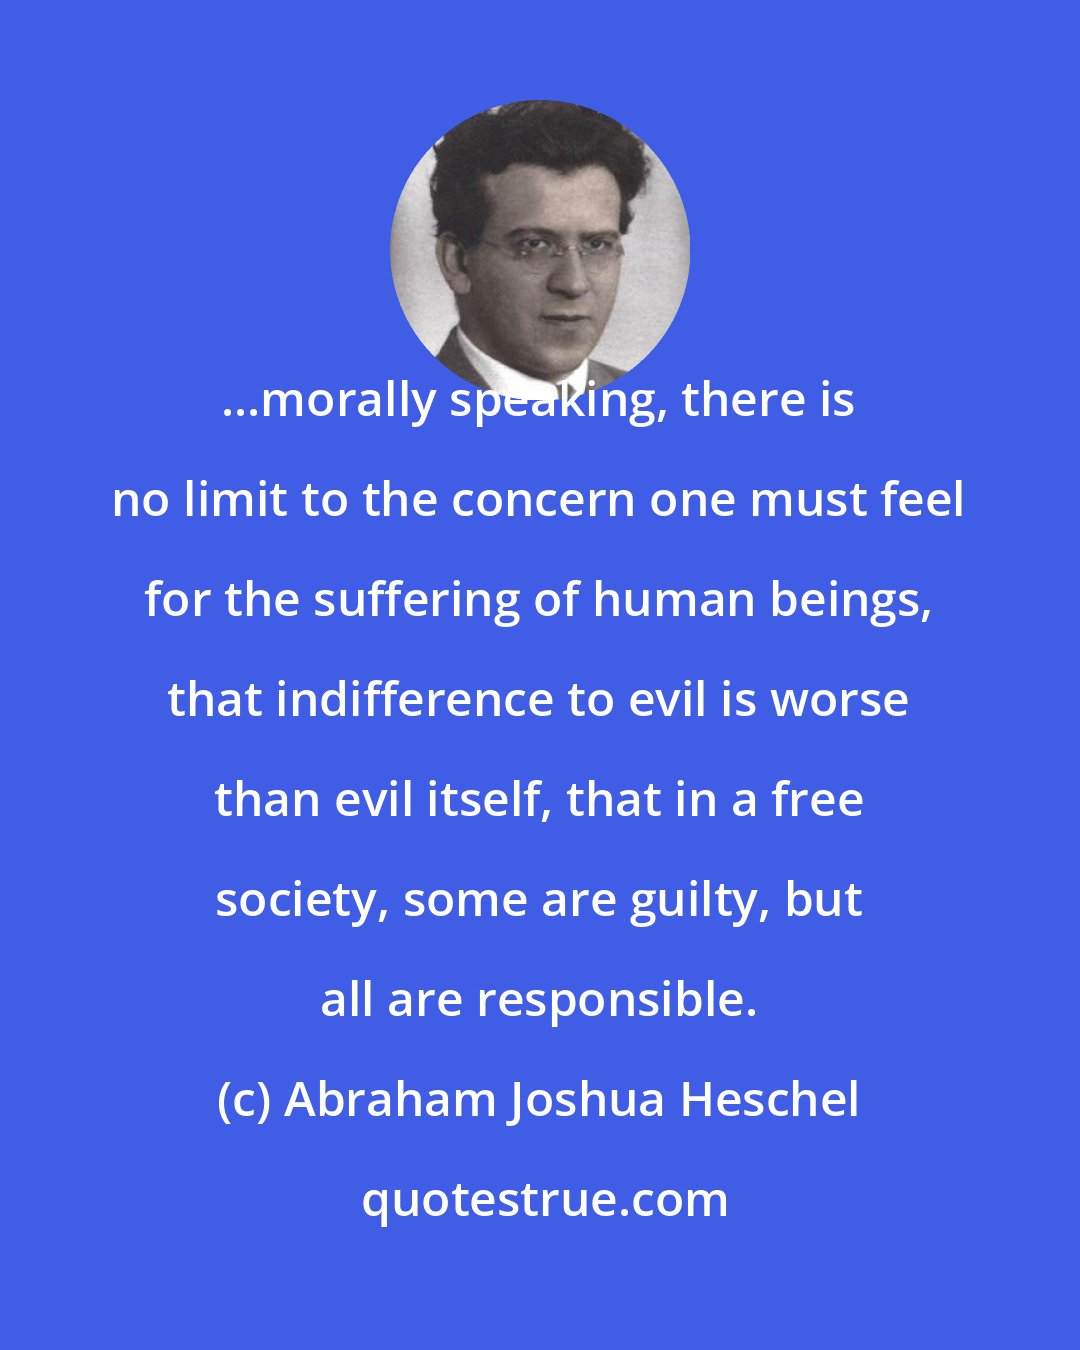 Abraham Joshua Heschel: ...morally speaking, there is no limit to the concern one must feel for the suffering of human beings, that indifference to evil is worse than evil itself, that in a free society, some are guilty, but all are responsible.